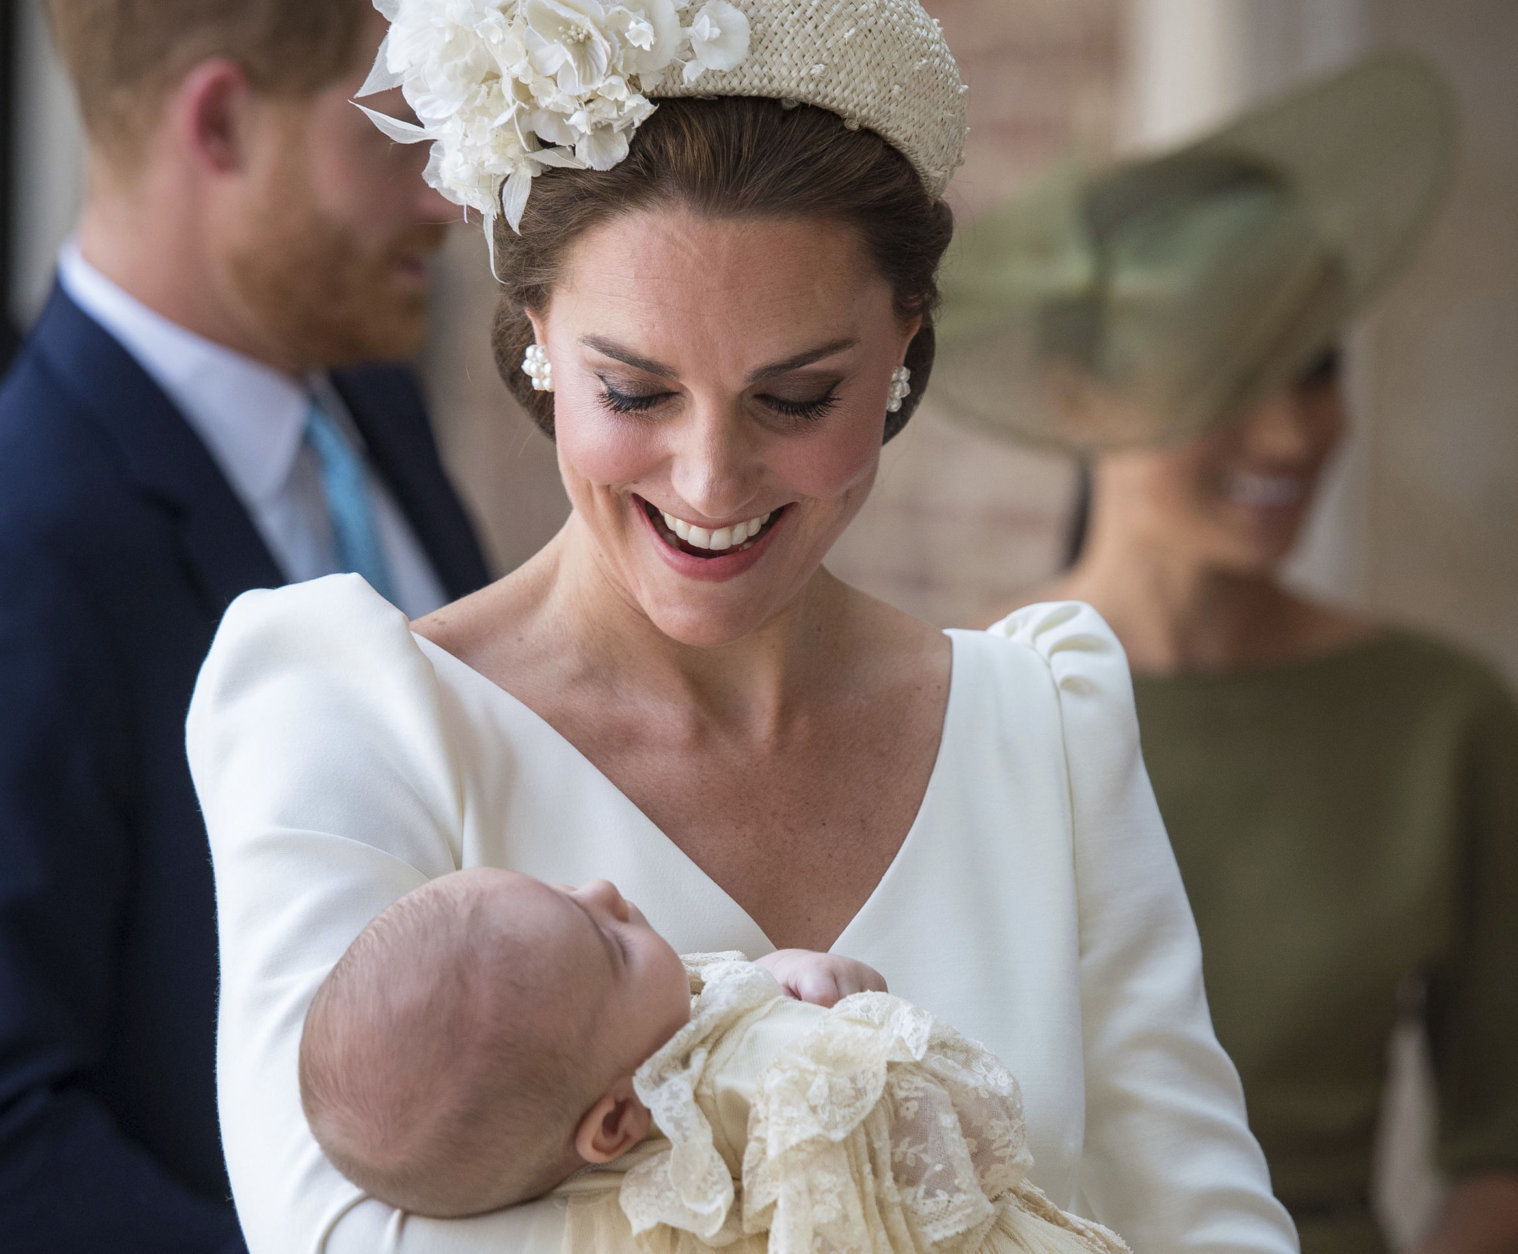 Kate, Duchess of Cambridge carries Prince Louis as they arrive for his christening service at the Chapel Royal, St James's Palace, London, Monday, July 9, 2018. (Dominic Lipinski/Pool Photo via AP)